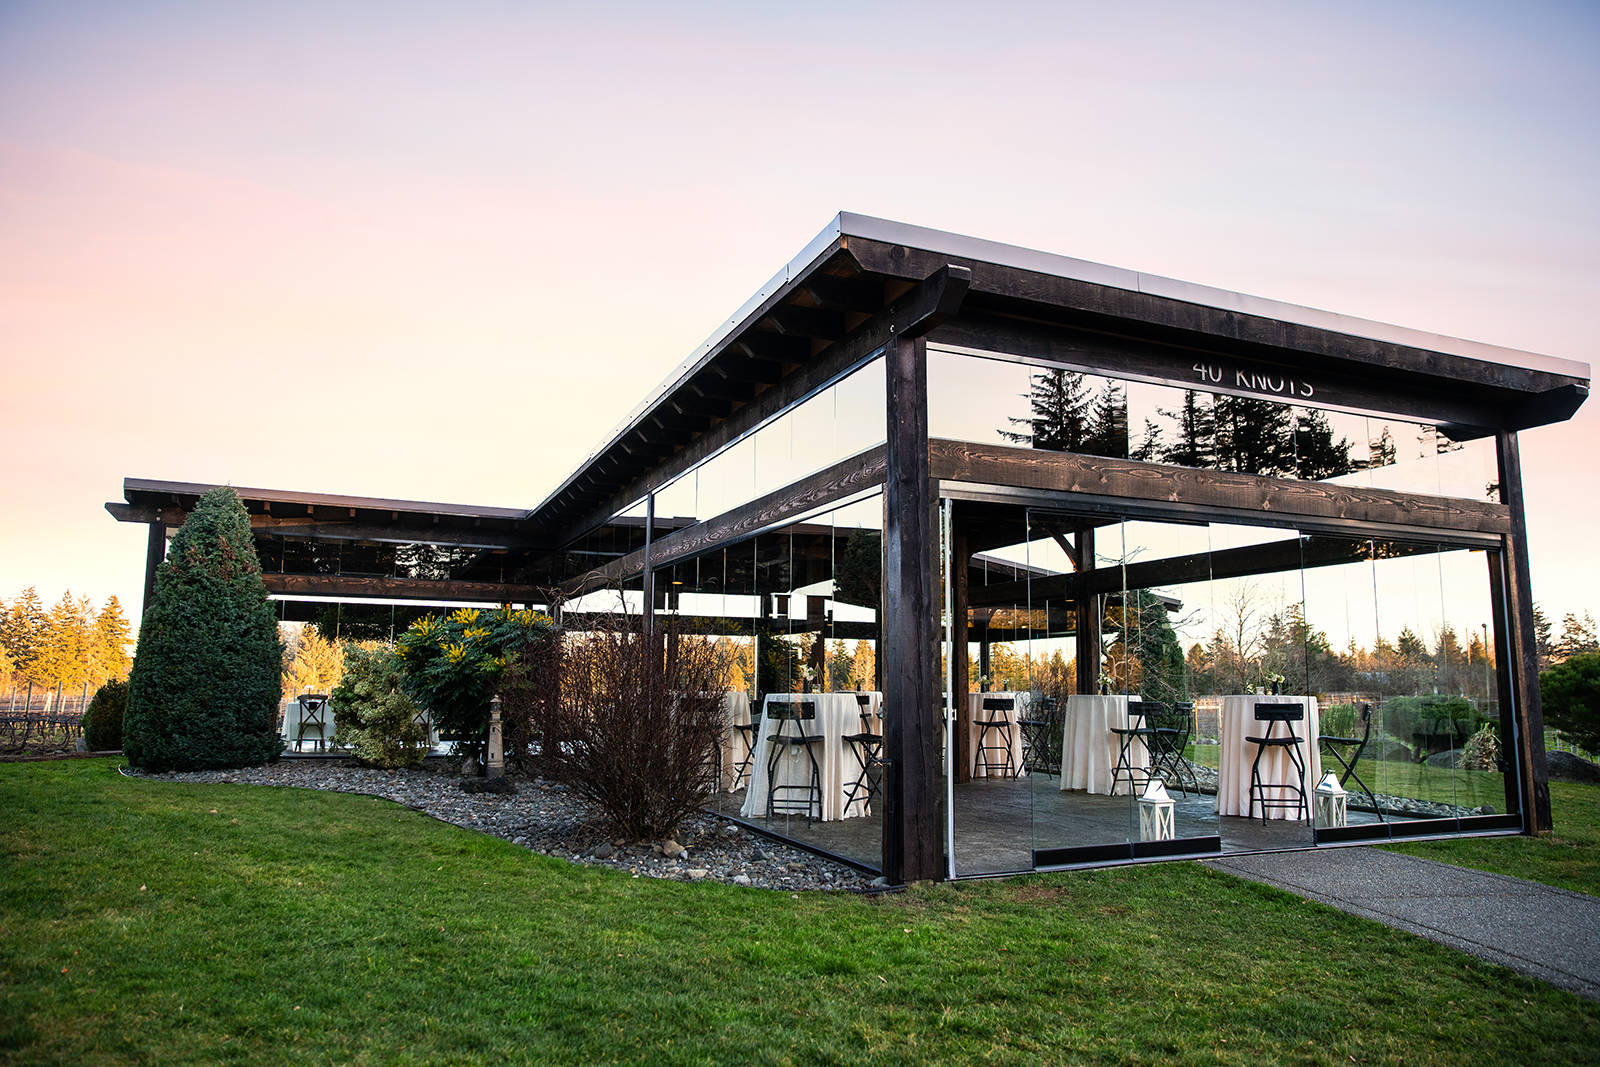 Next to the Salish Sea, with a view of the glacier, 40 Knots Winery visitors can relax in the Cellar Tasting Lounge or outside on the heated and recently renovated Vineyard Terrace, while enjoying a flight of red or white.